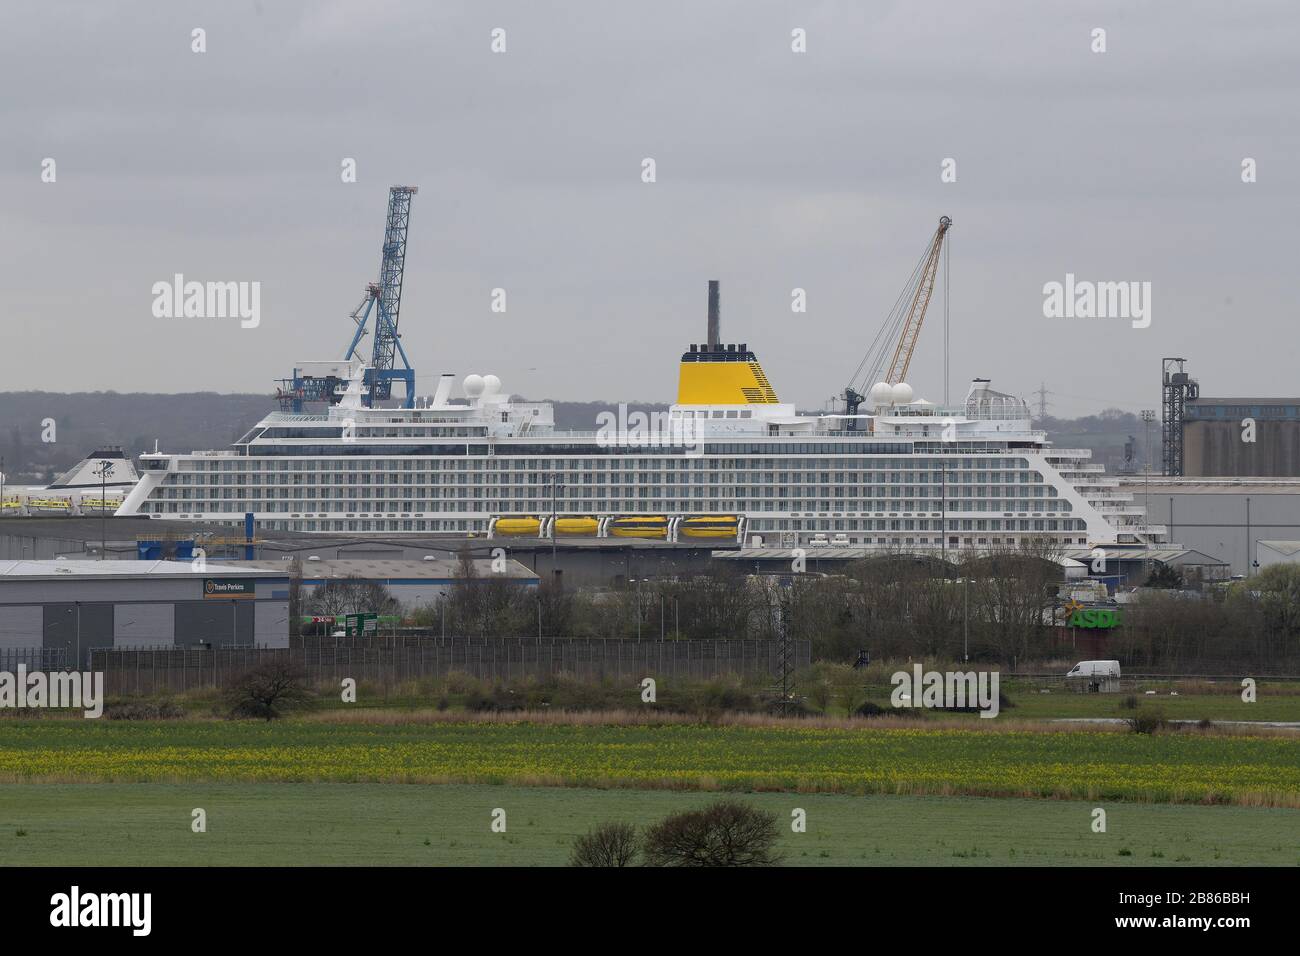 Tilbury Essex, UK. 20th Mar, 2020. The Cruise ship Spirit of Discovery in Tilbury docks due to the Coronavirus outbreak has been put on standby for the possible use as a hospital ship during the Covid19 crisis. The 58,250 tonne ship was delivered to Saga Cruises in July 2019 and has a capacity for 999 passengers and 523 crew. Credit: MARTIN DALTON/Alamy Live News Stock Photo